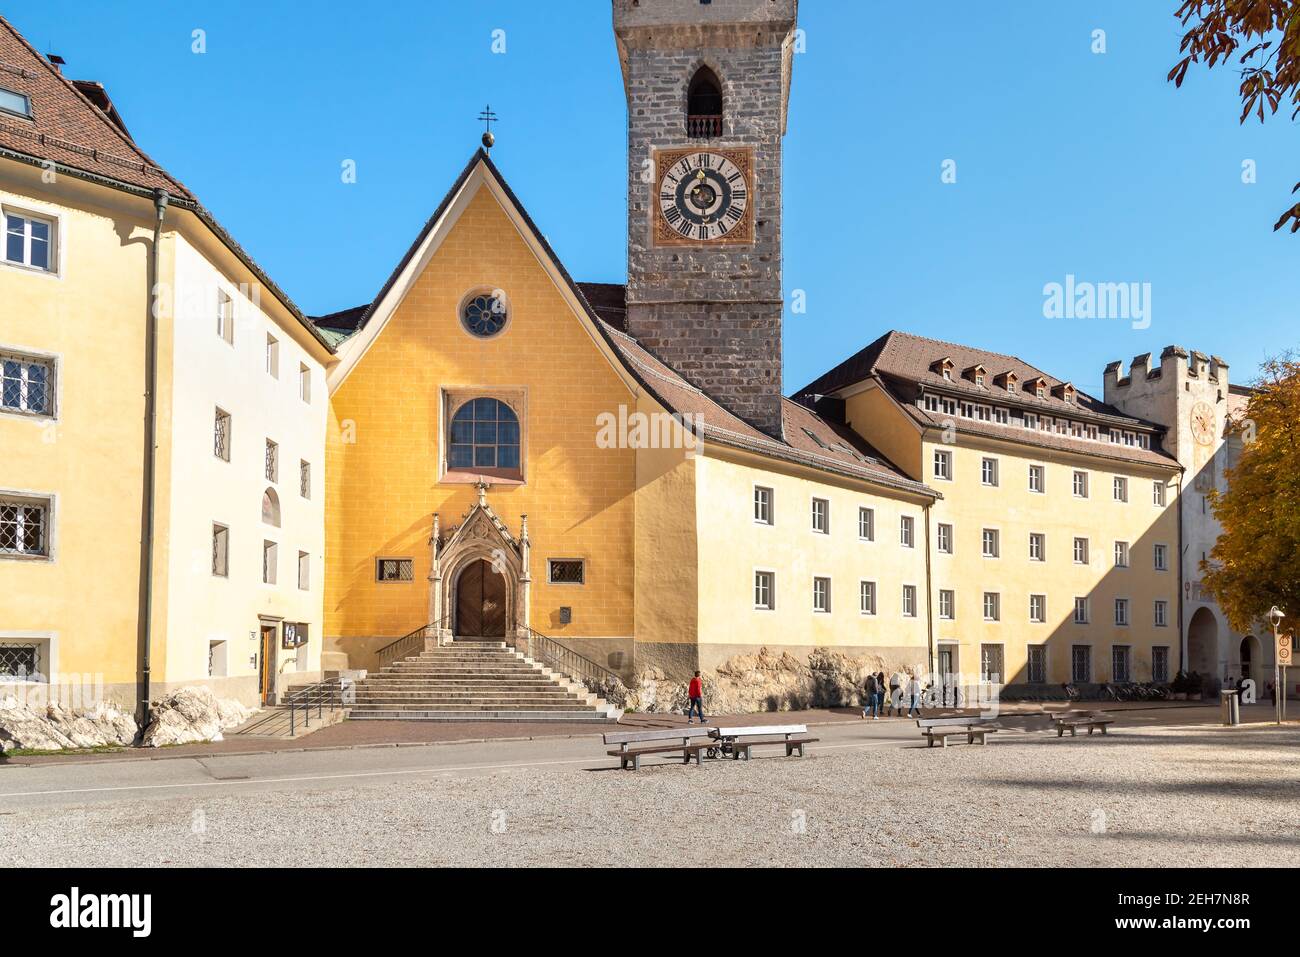 Bell tower of the Ursulinen Holy Saviour church in the historic city of Bruneck or Brunico, South Tyrol, Italy Stock Photo